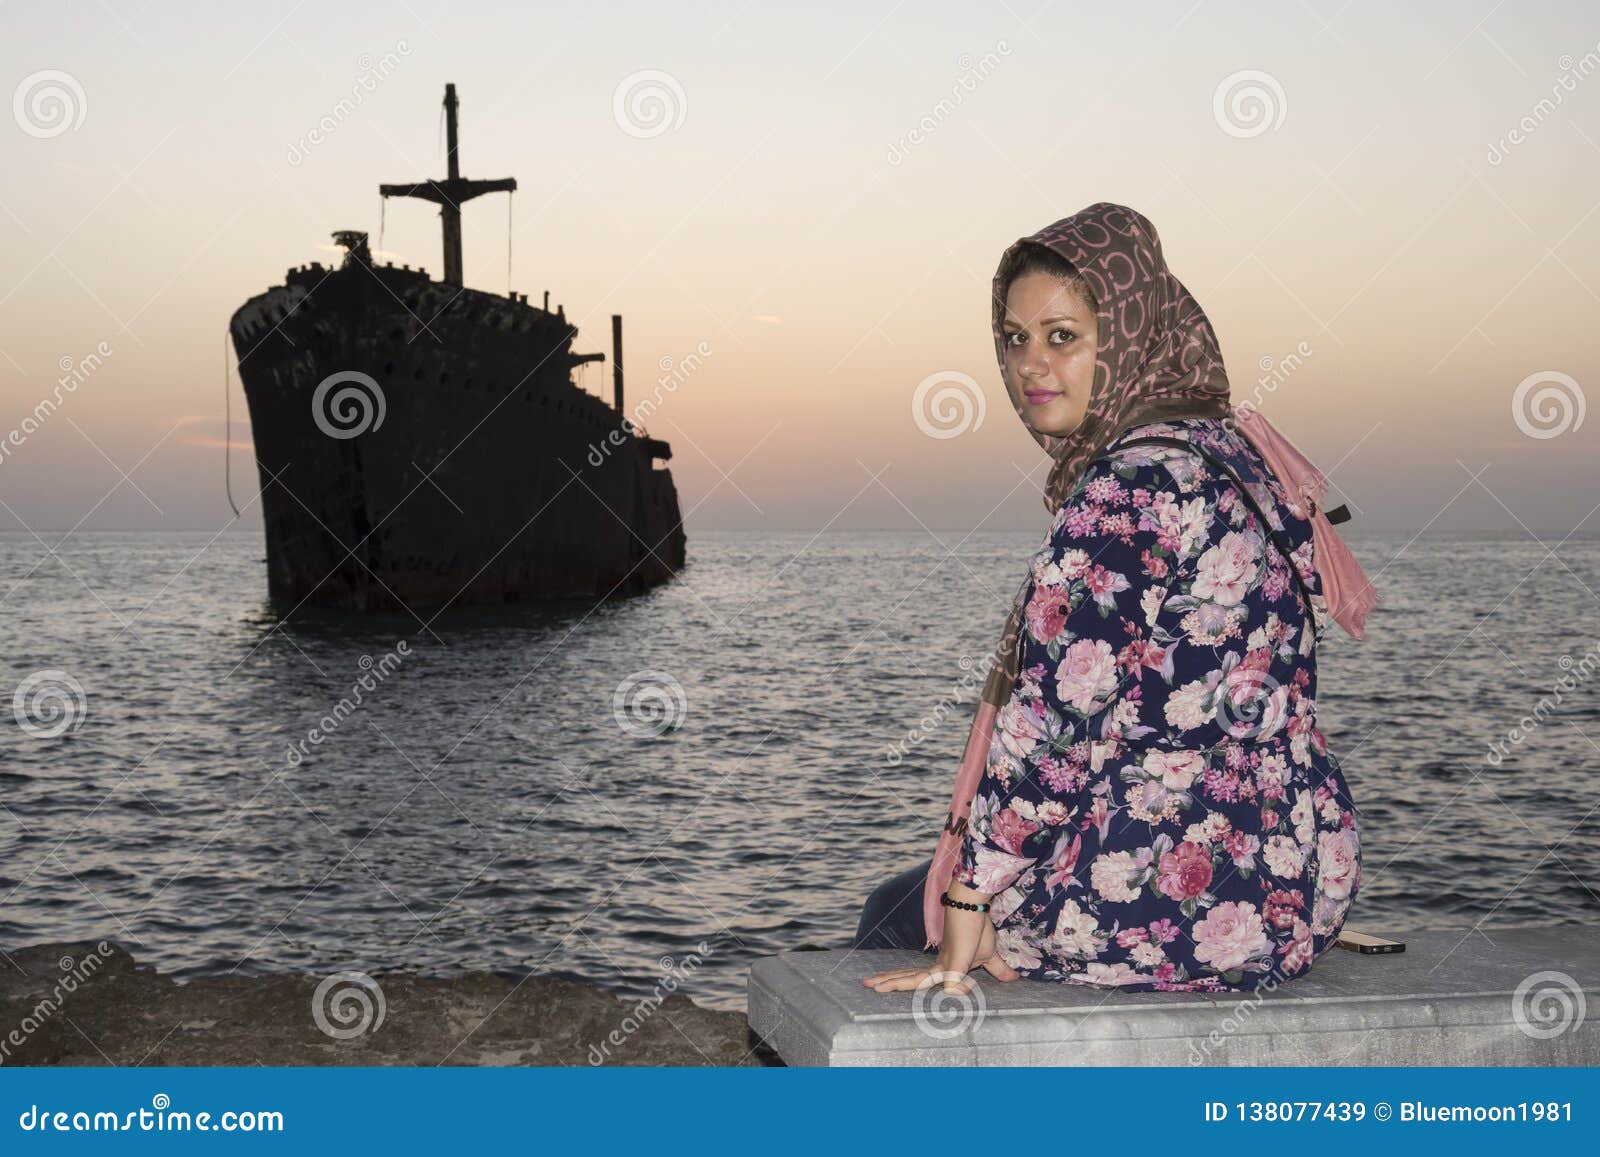 sitting woman with greek ship wreckage in kish island after sunset